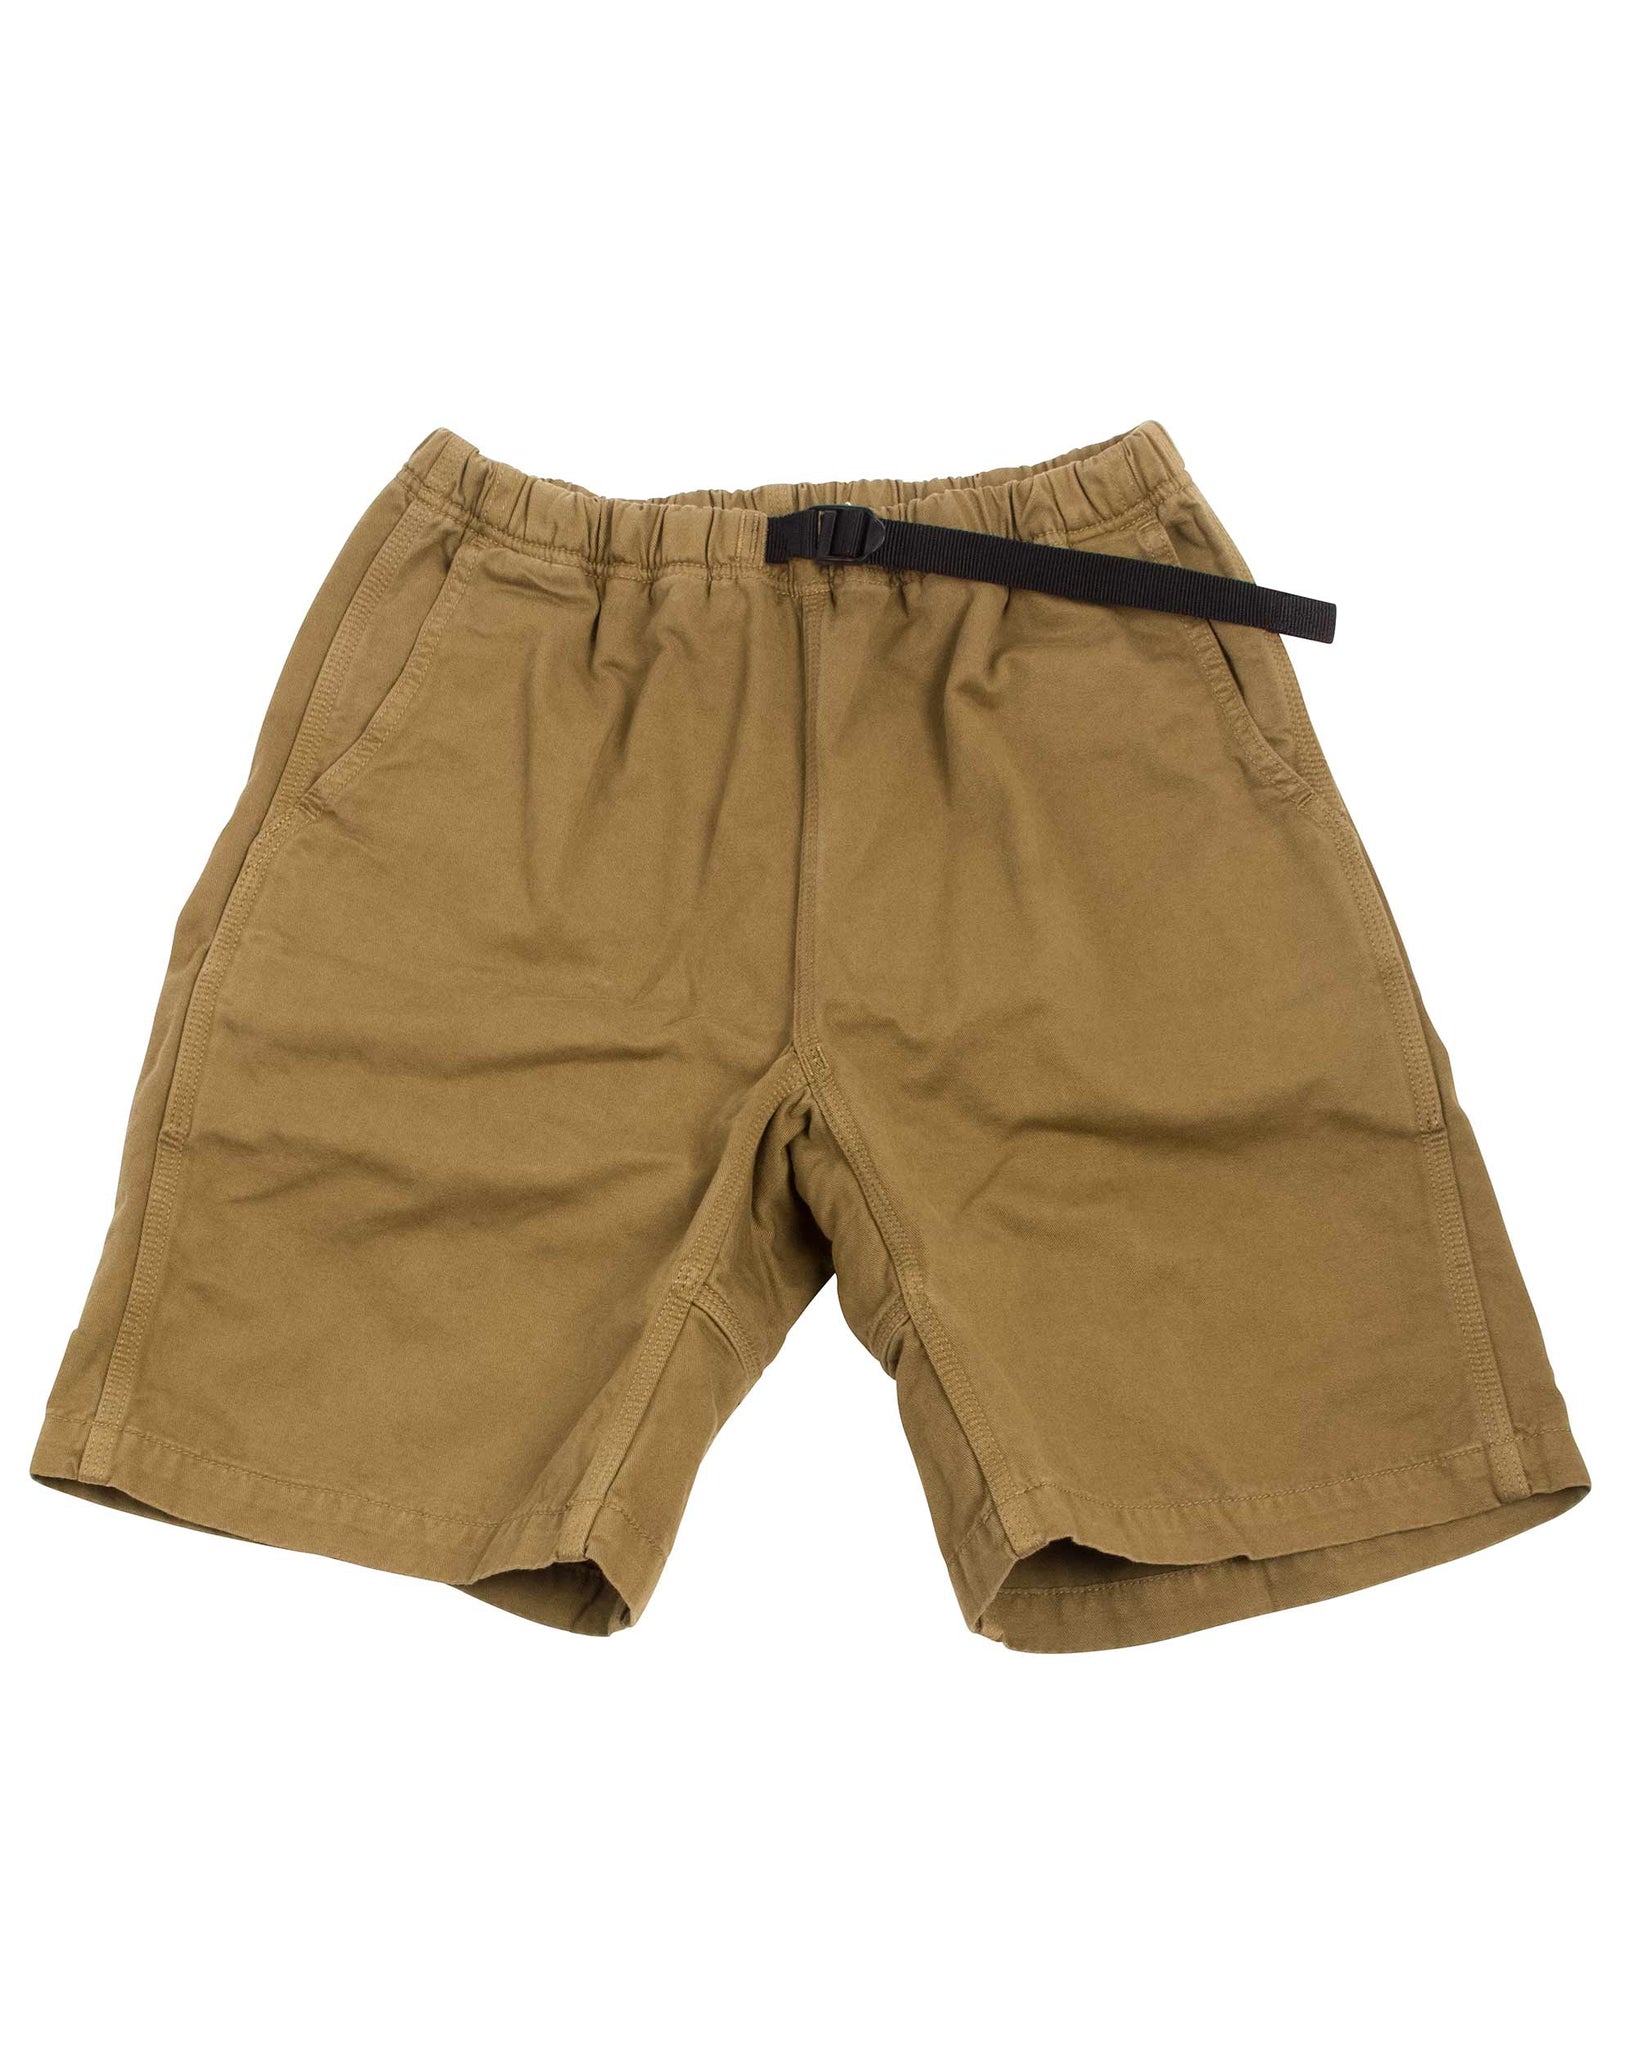 The Real McCoy's MP21017 Climbers' Shorts (Over-Dyed) Khaki